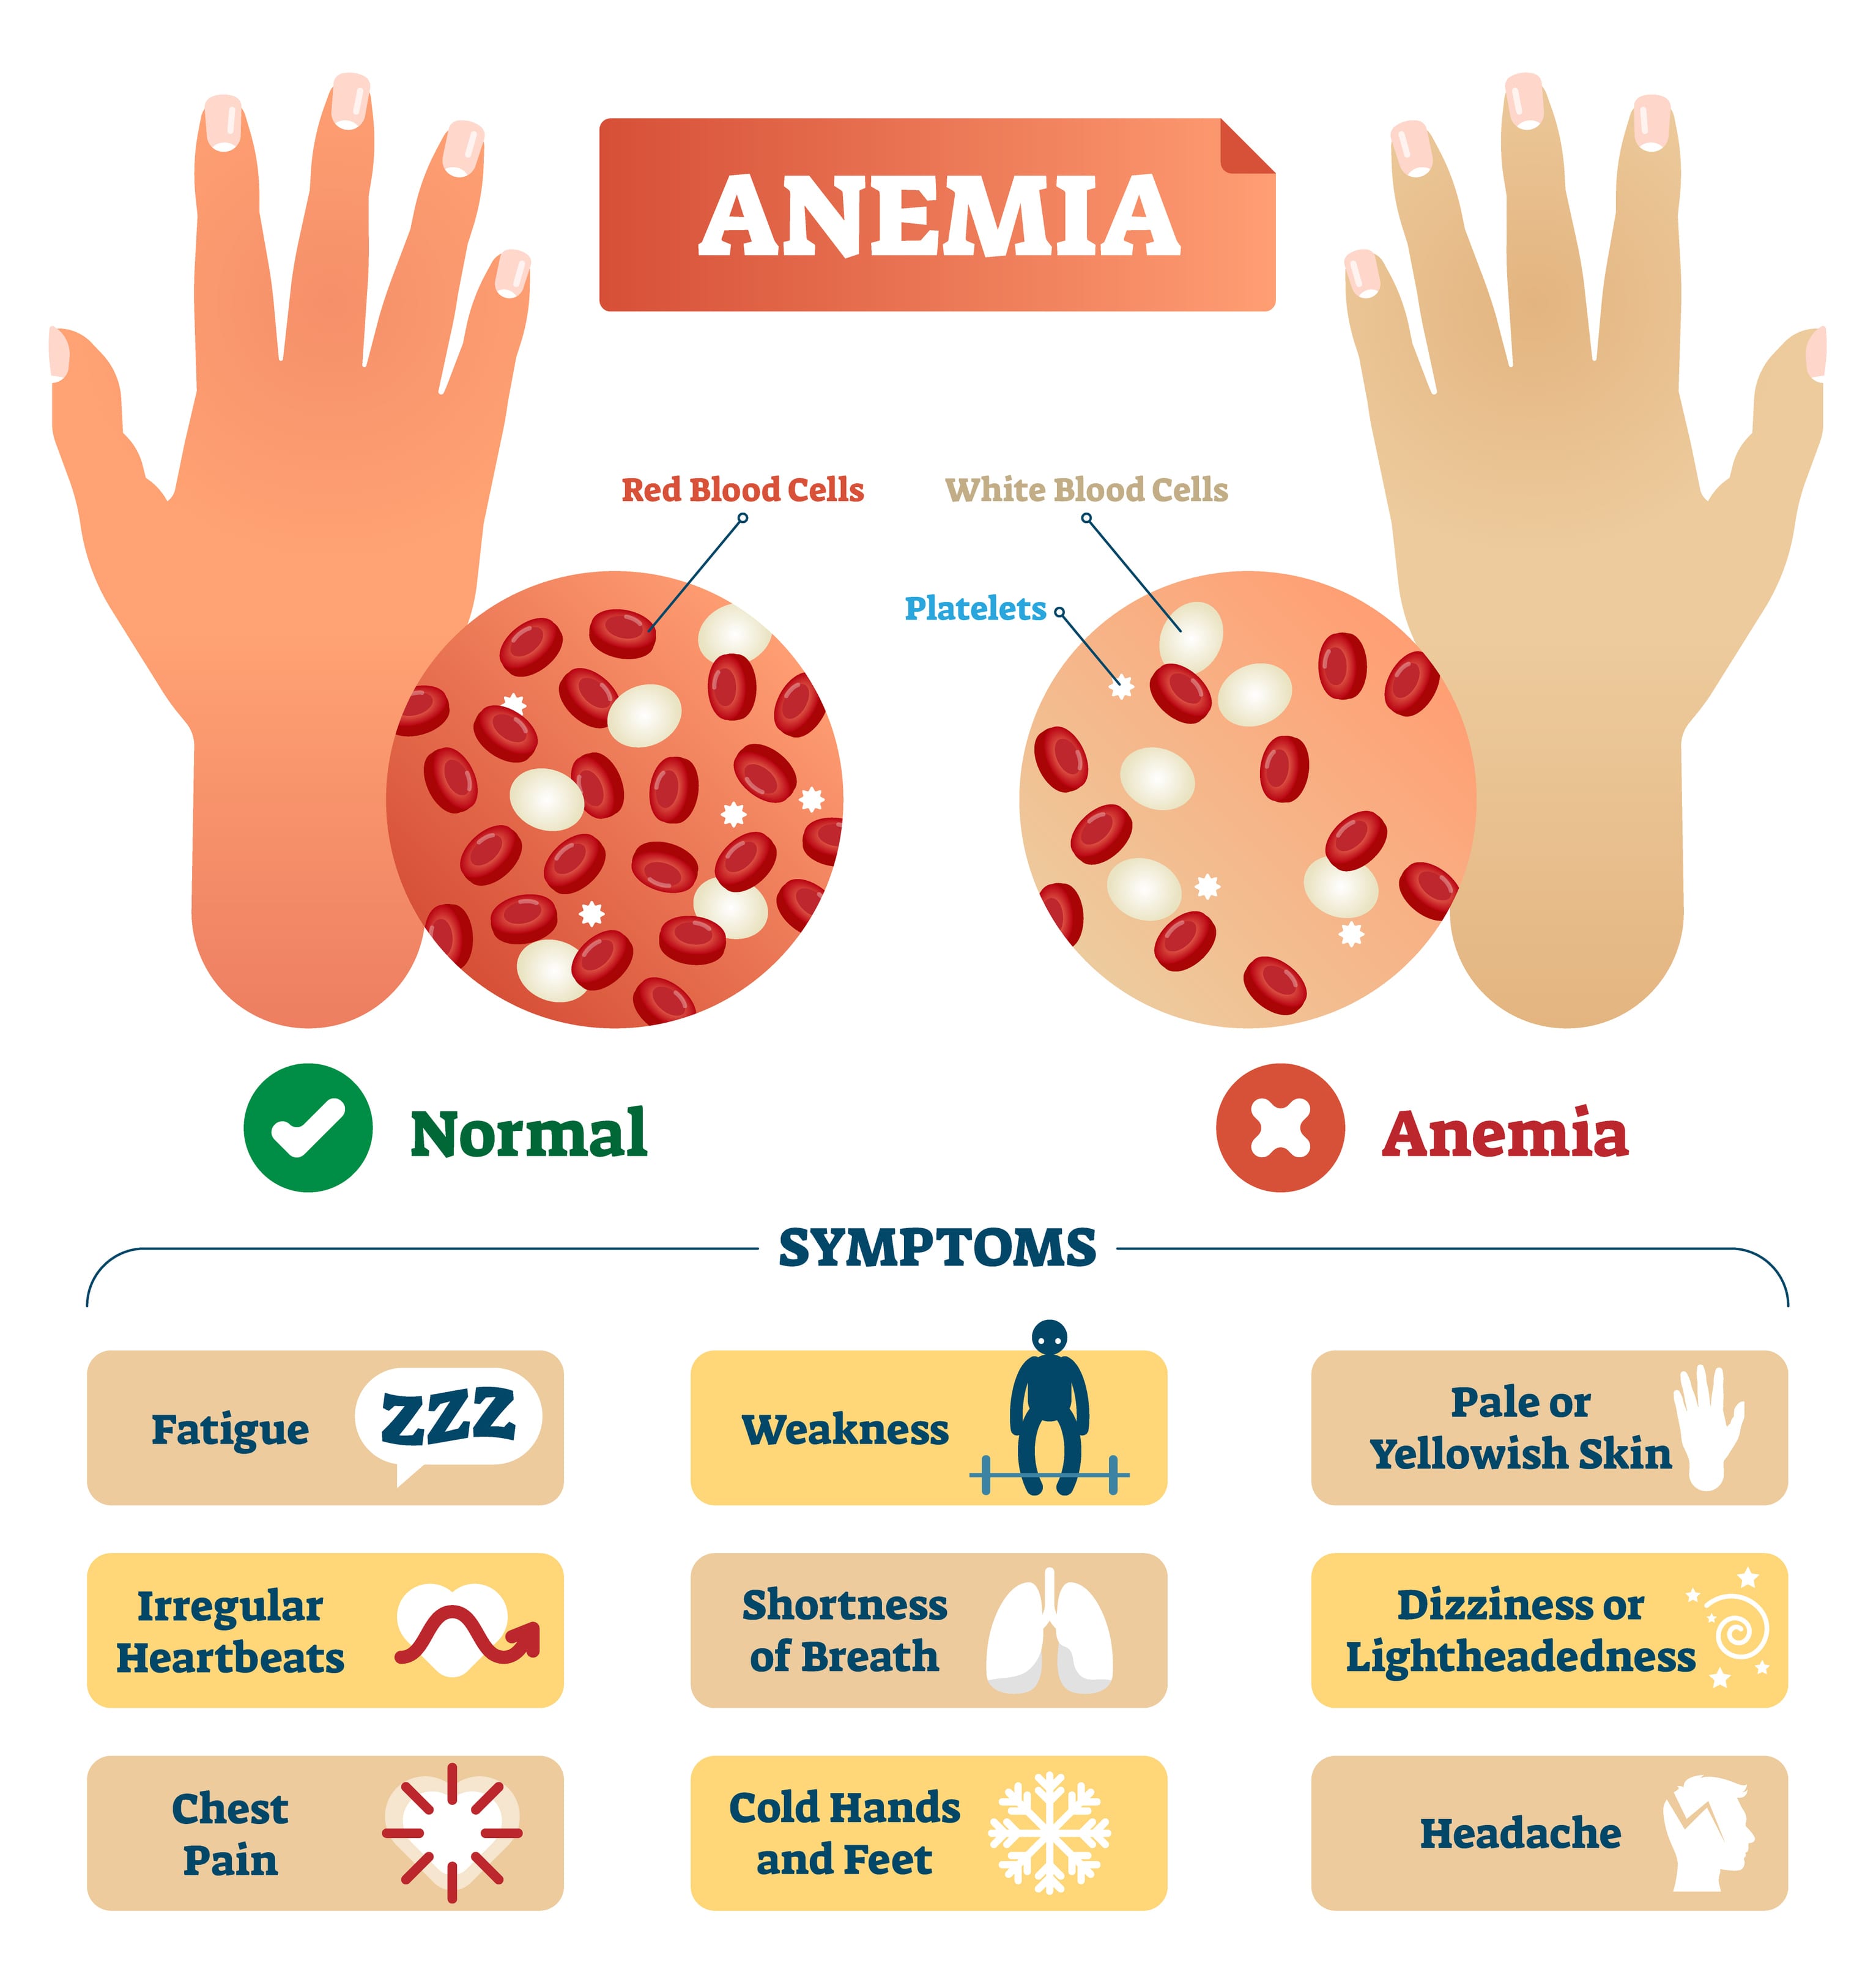 <p>Explain why iron deficiency can lead to anemia?</p>